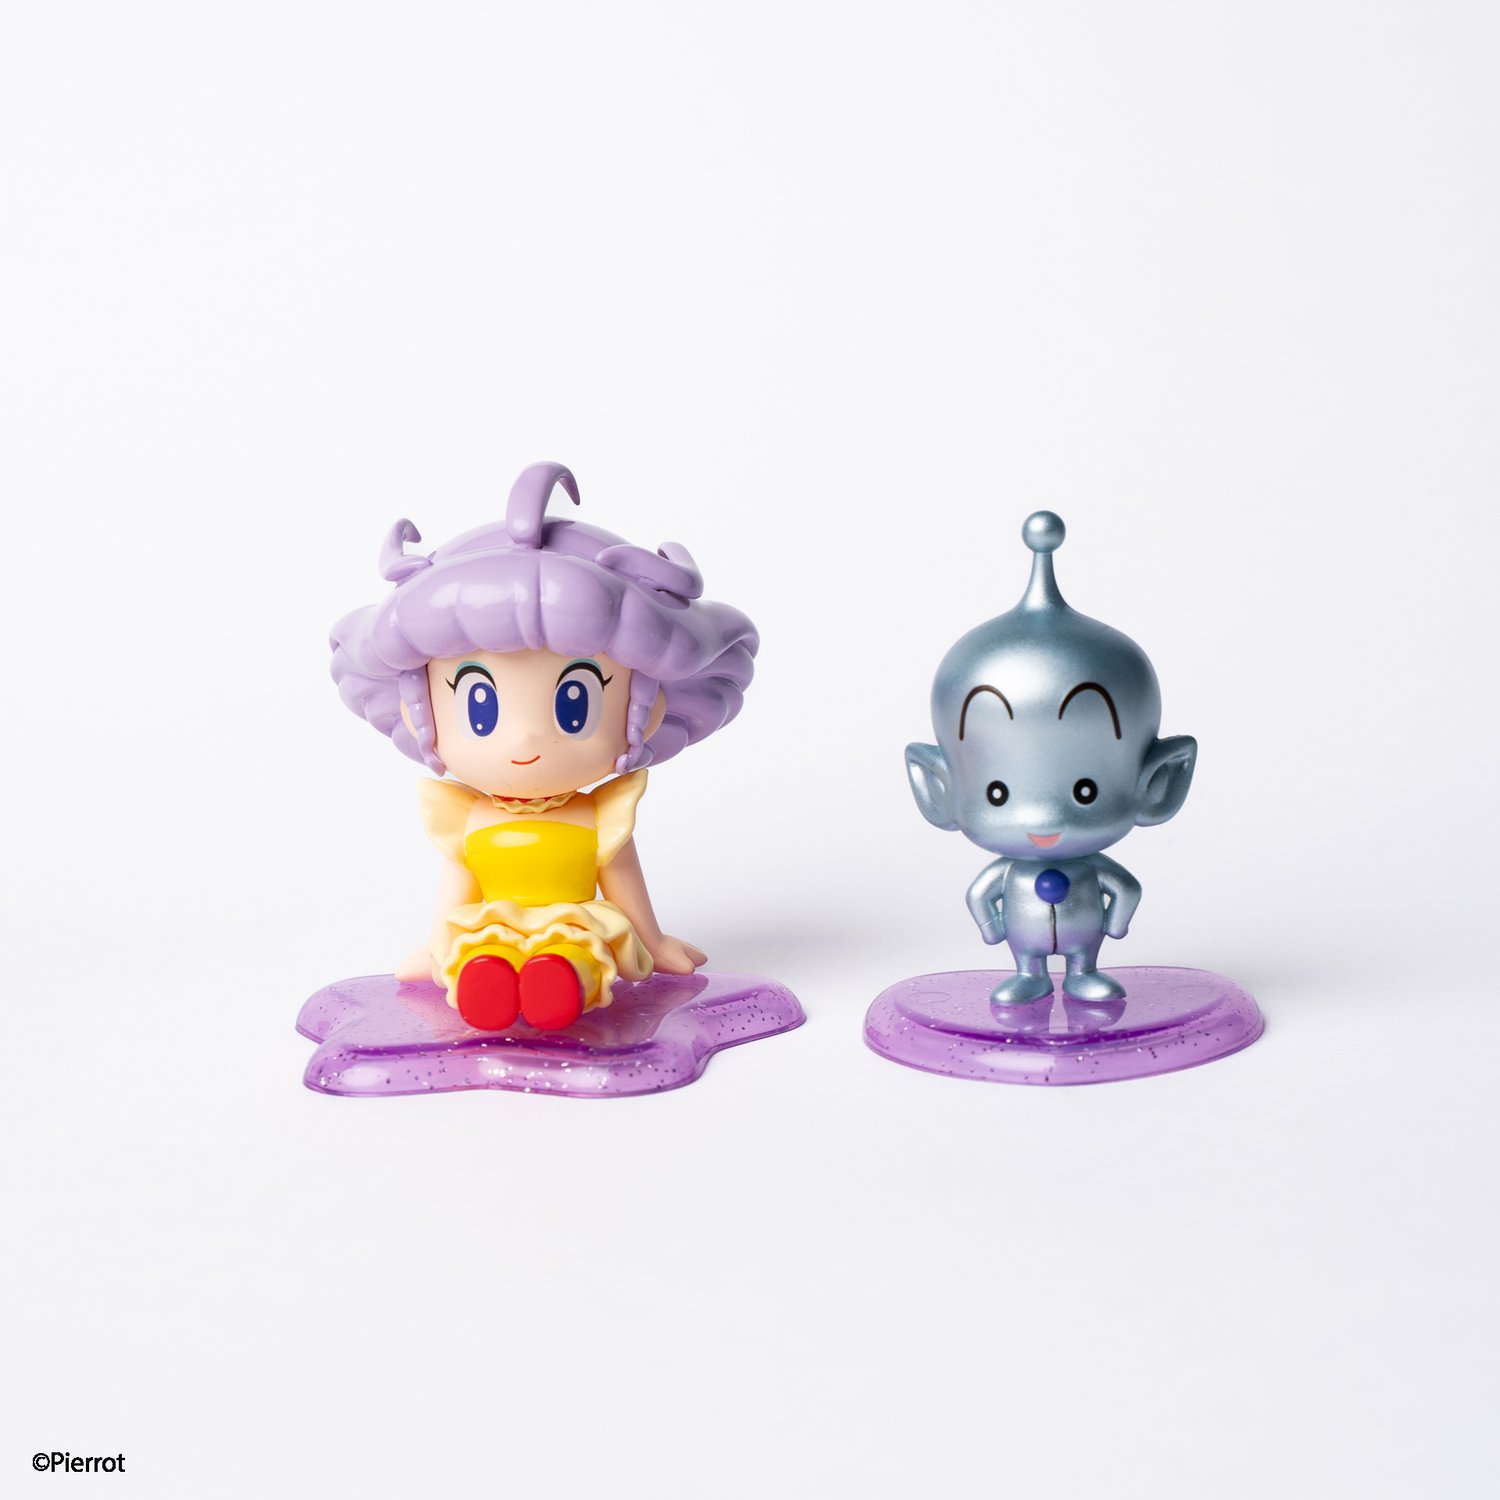 Image of CREAMY MAMI COLLECTOR'S FIGURE SET 